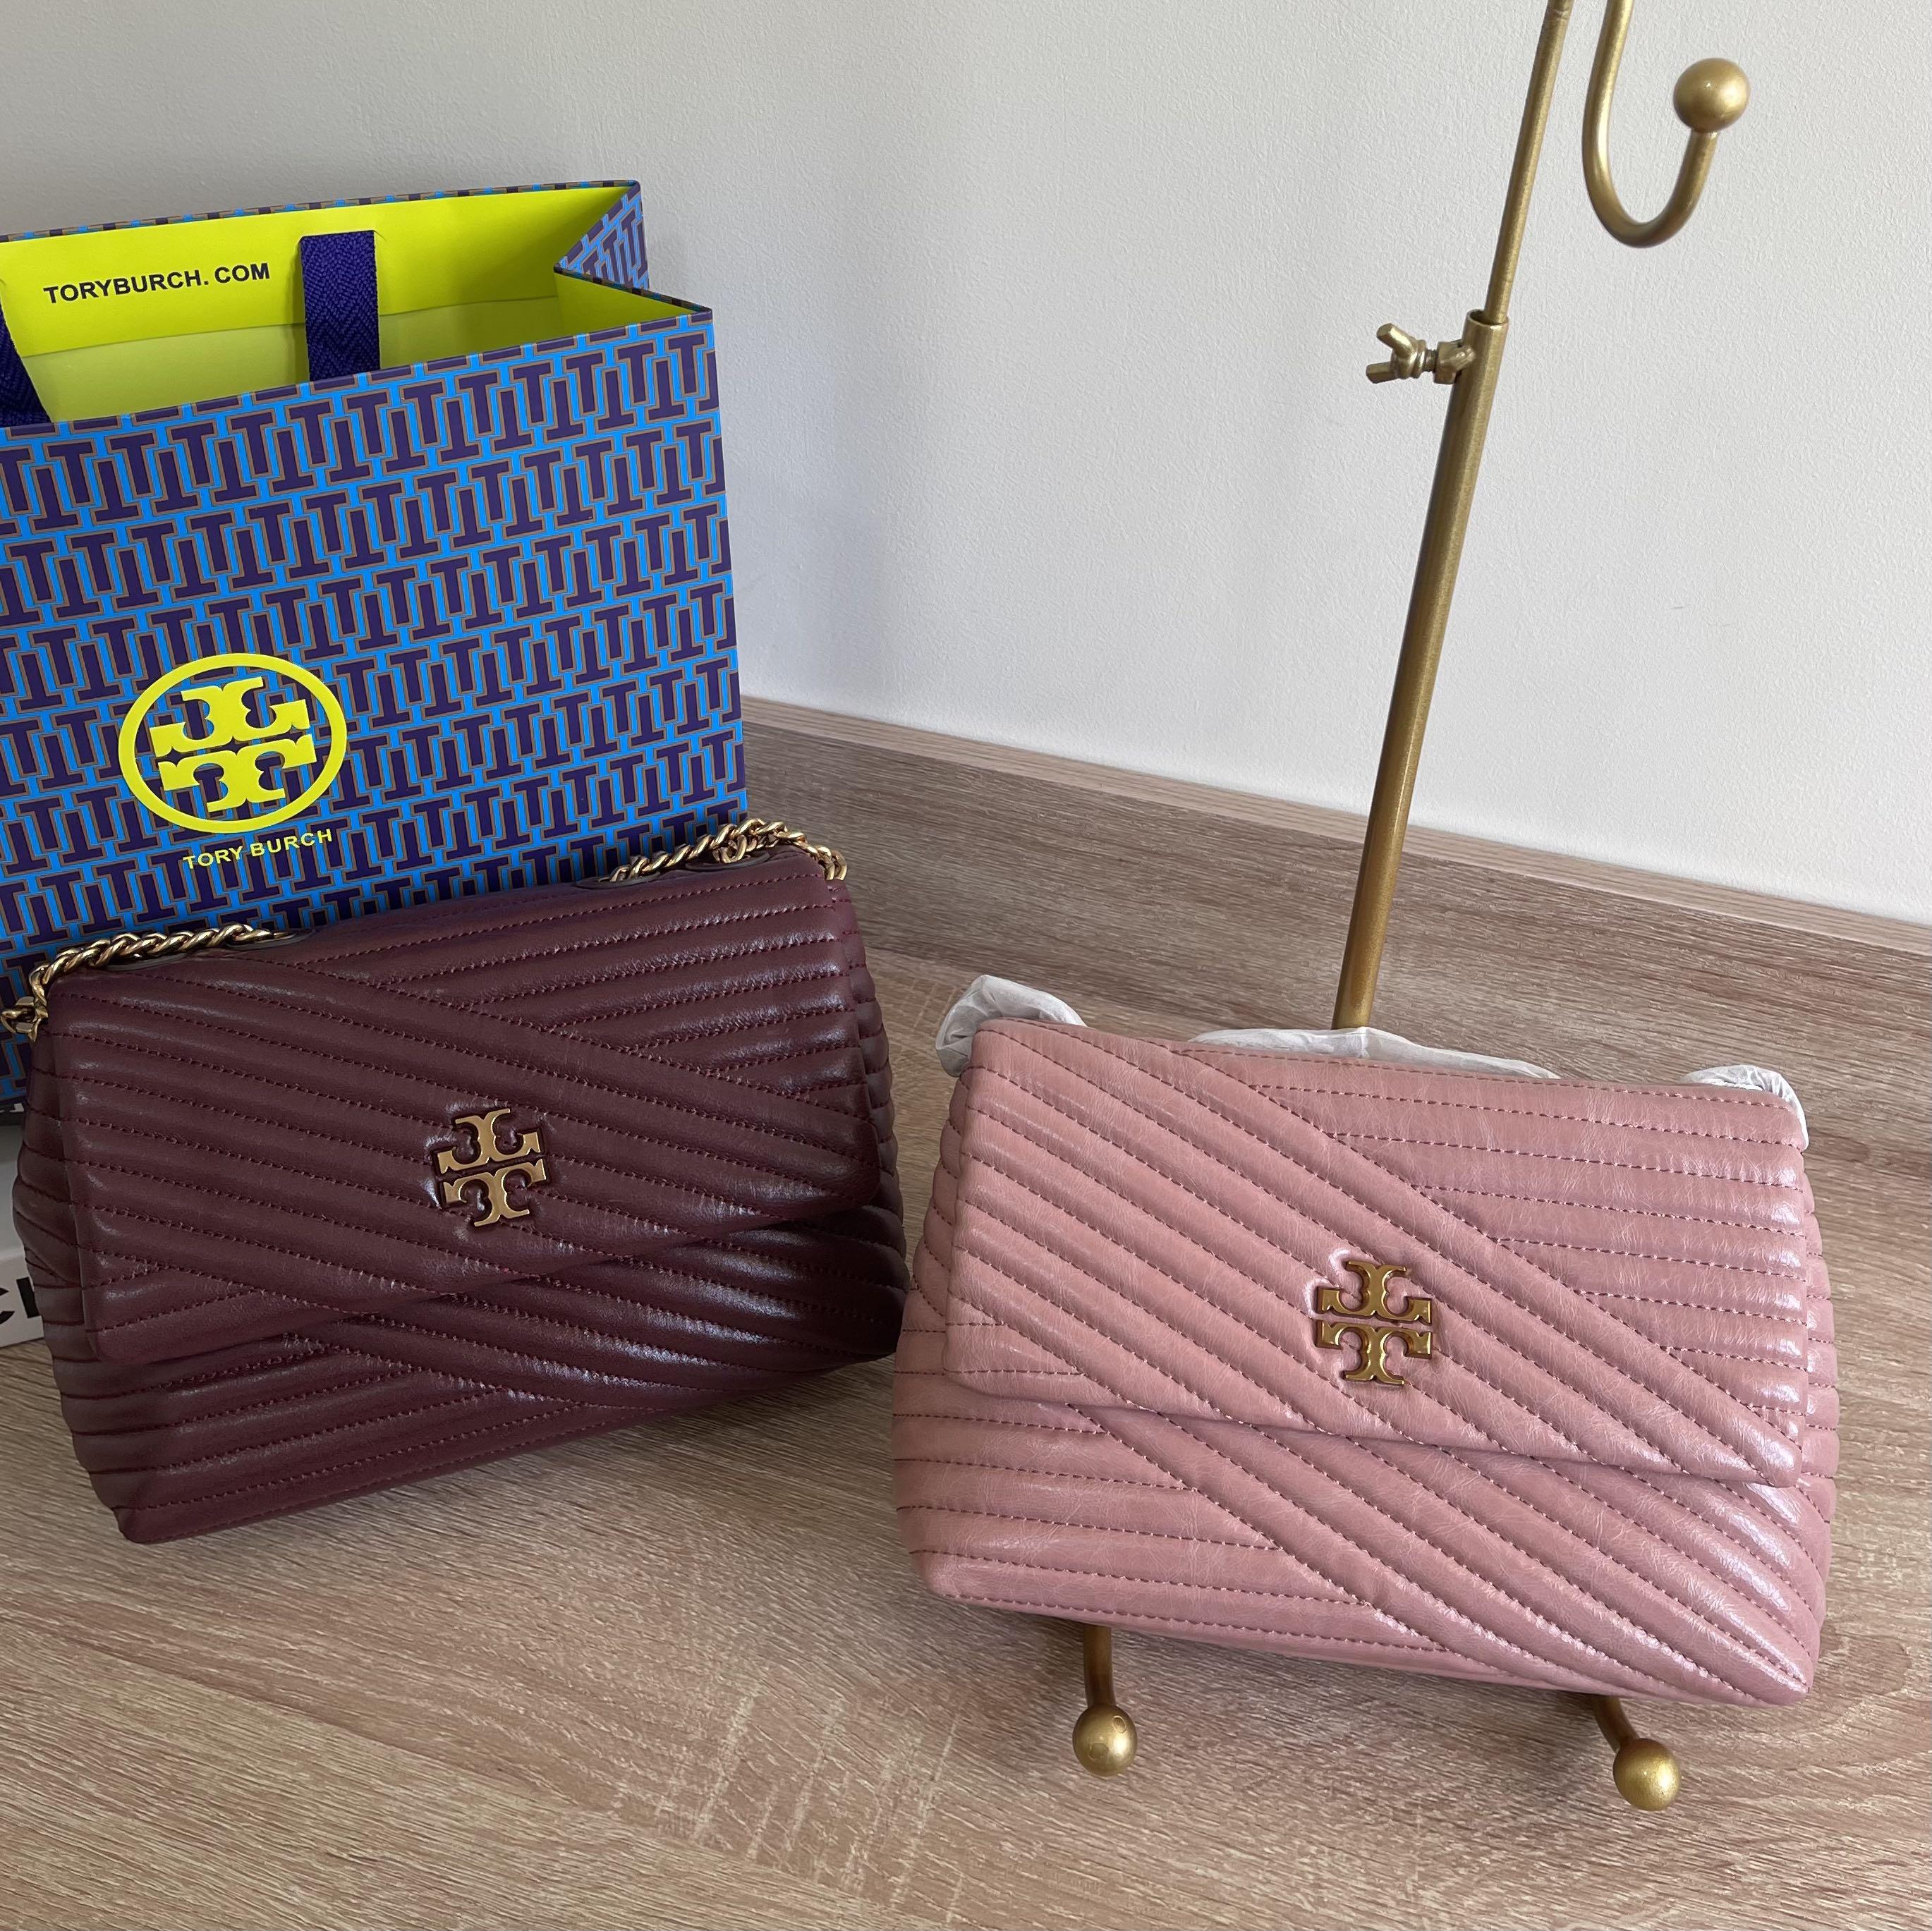 All About The Tory Burch Small Kira Convertible Shoulder Bag - Mod